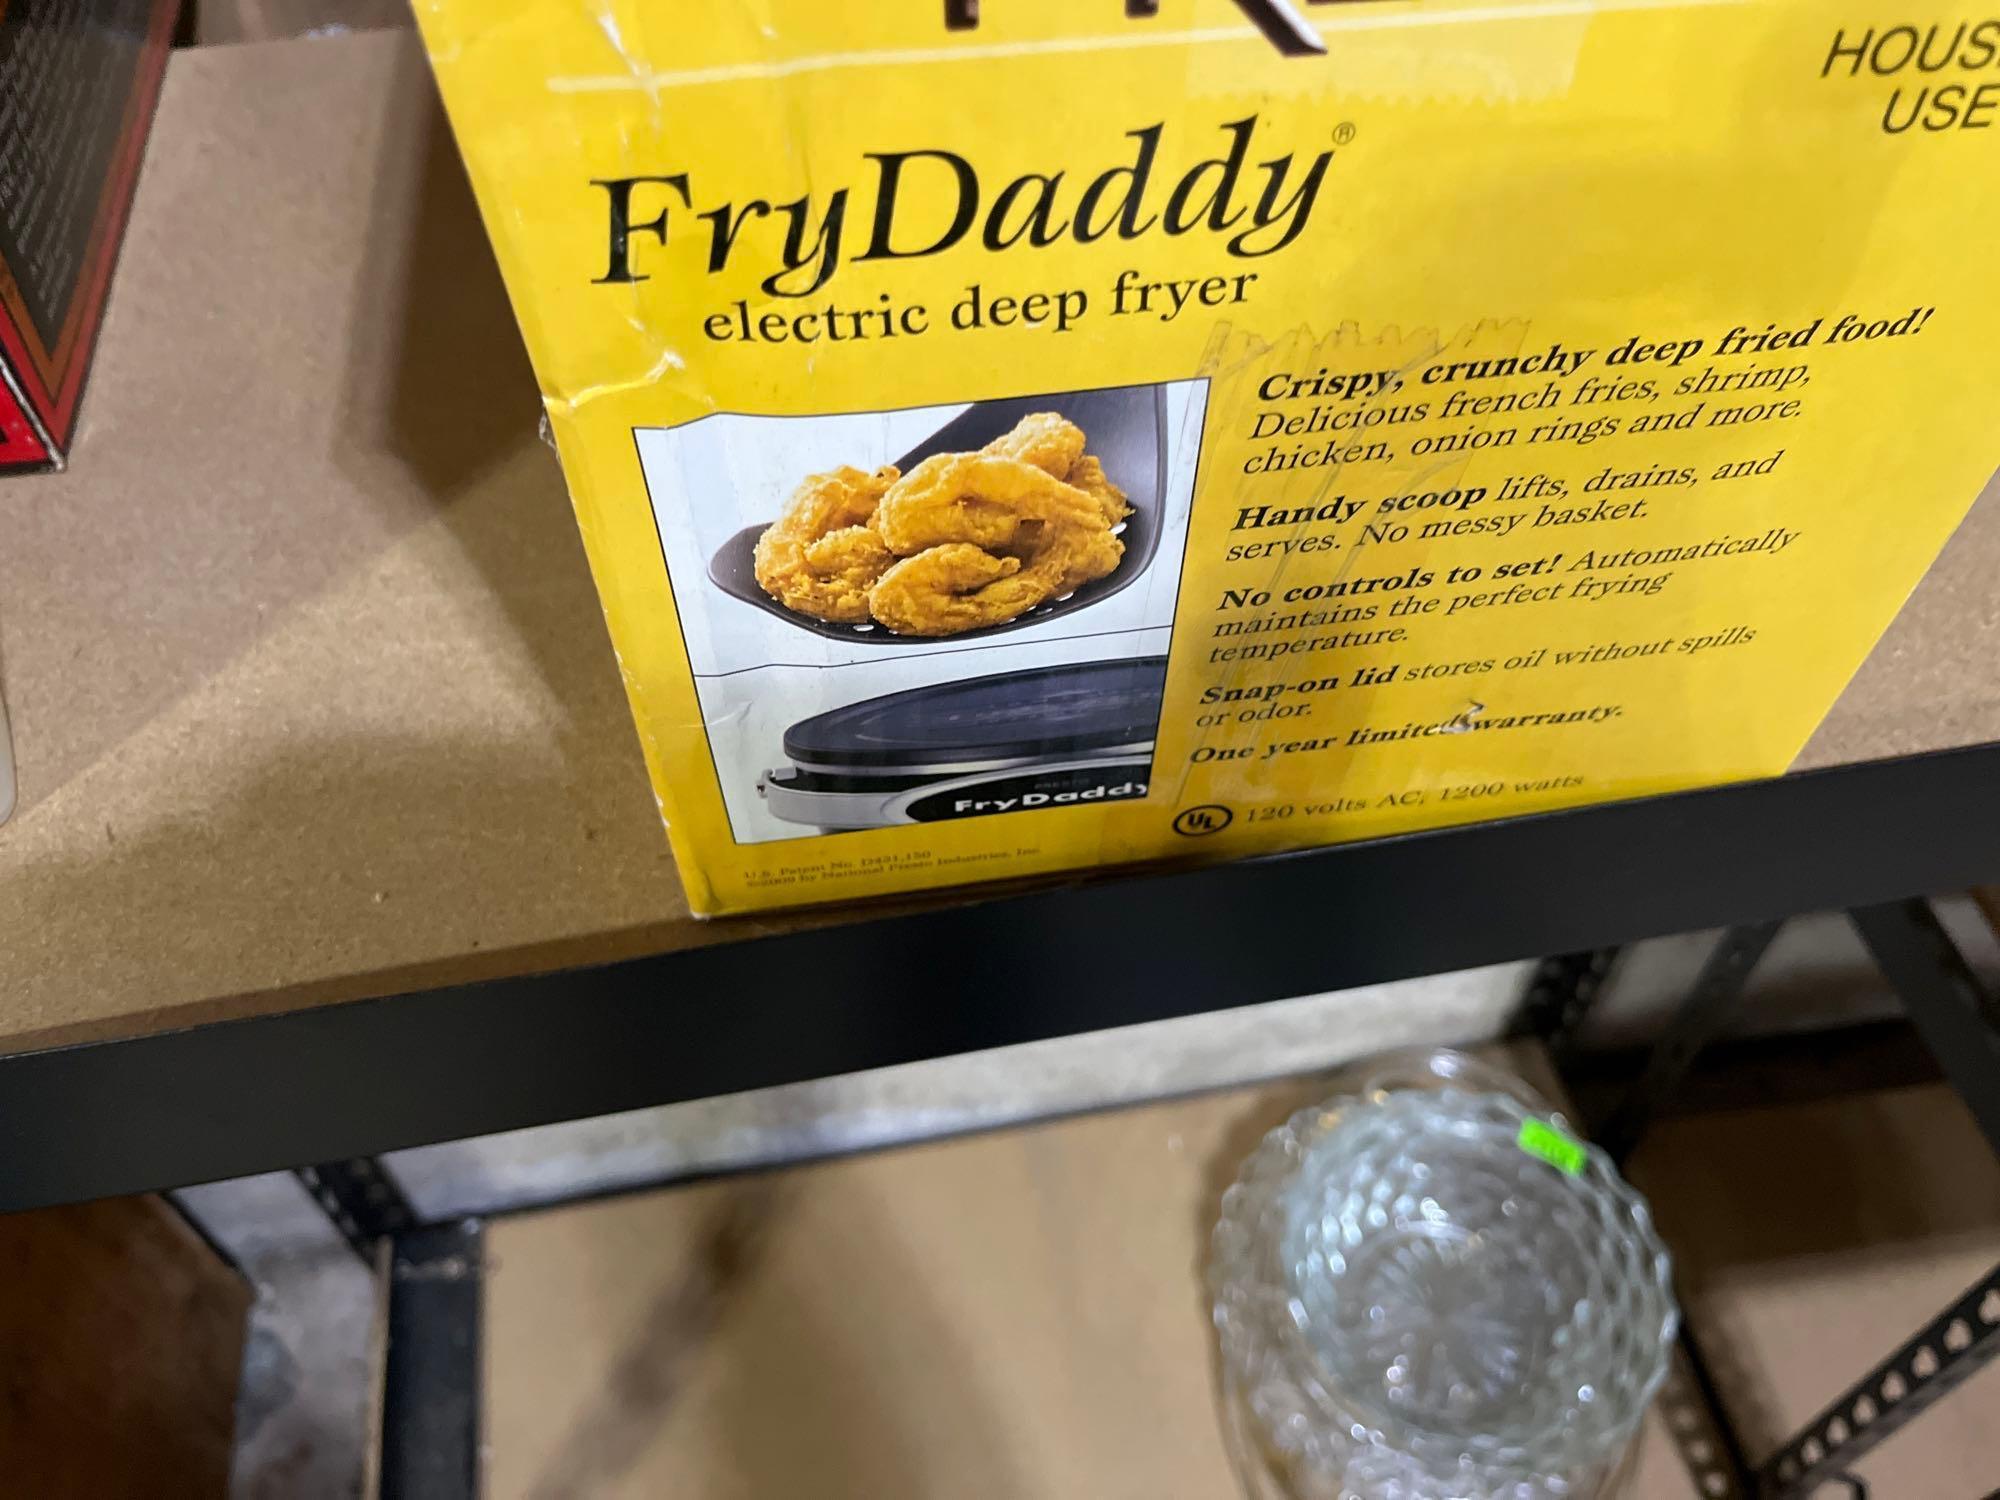 Fry Daddy and more